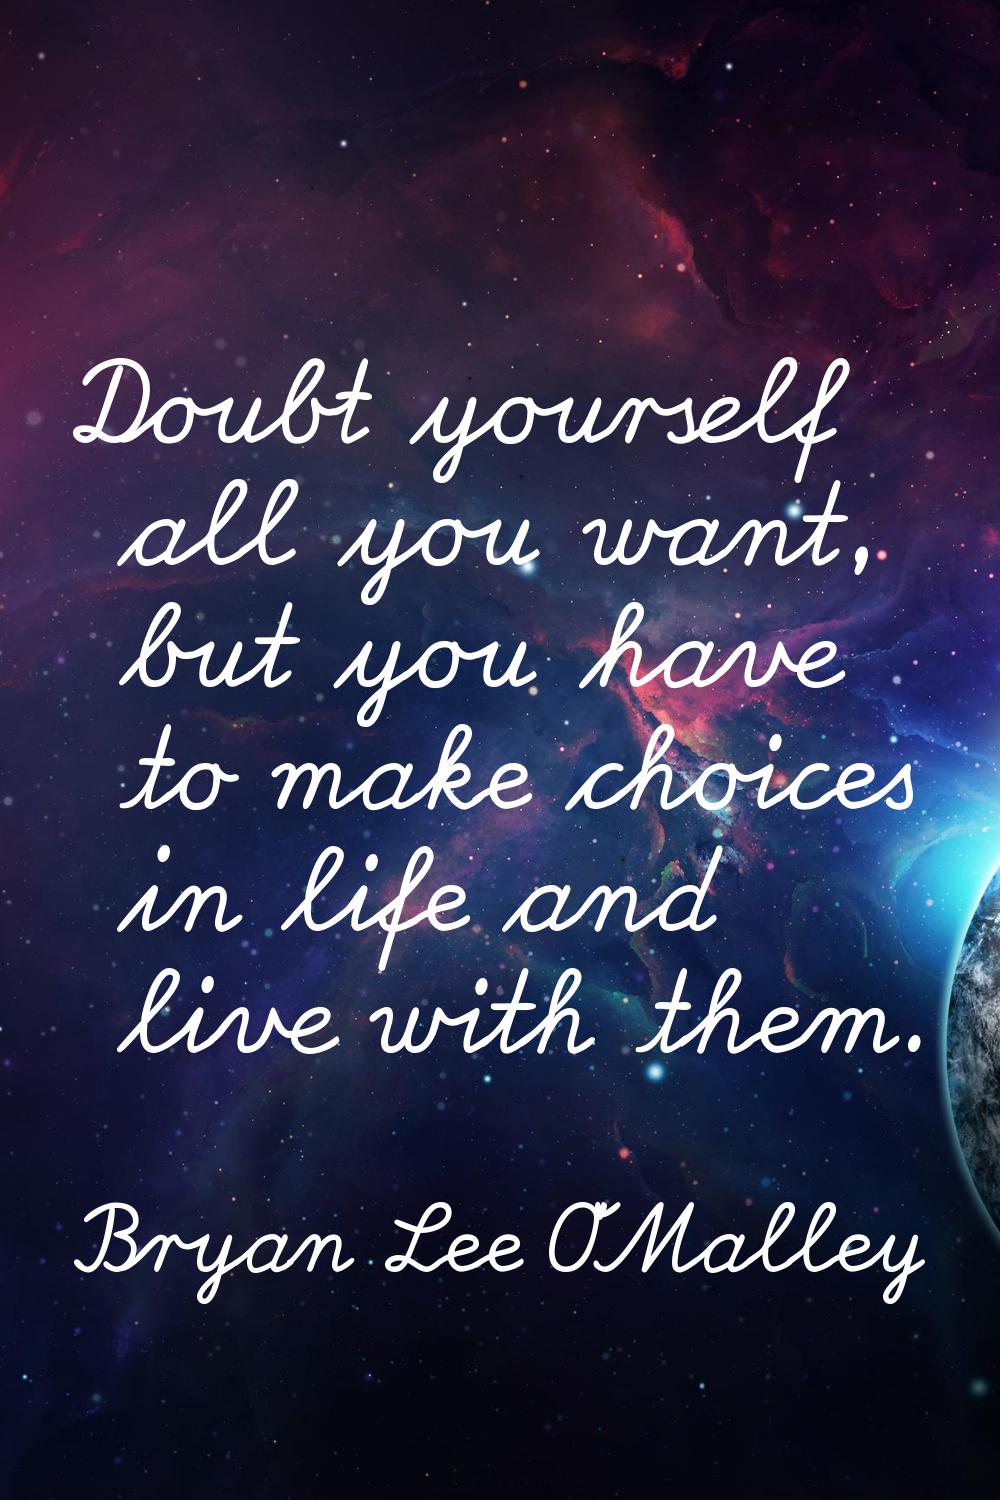 Doubt yourself all you want, but you have to make choices in life and live with them.